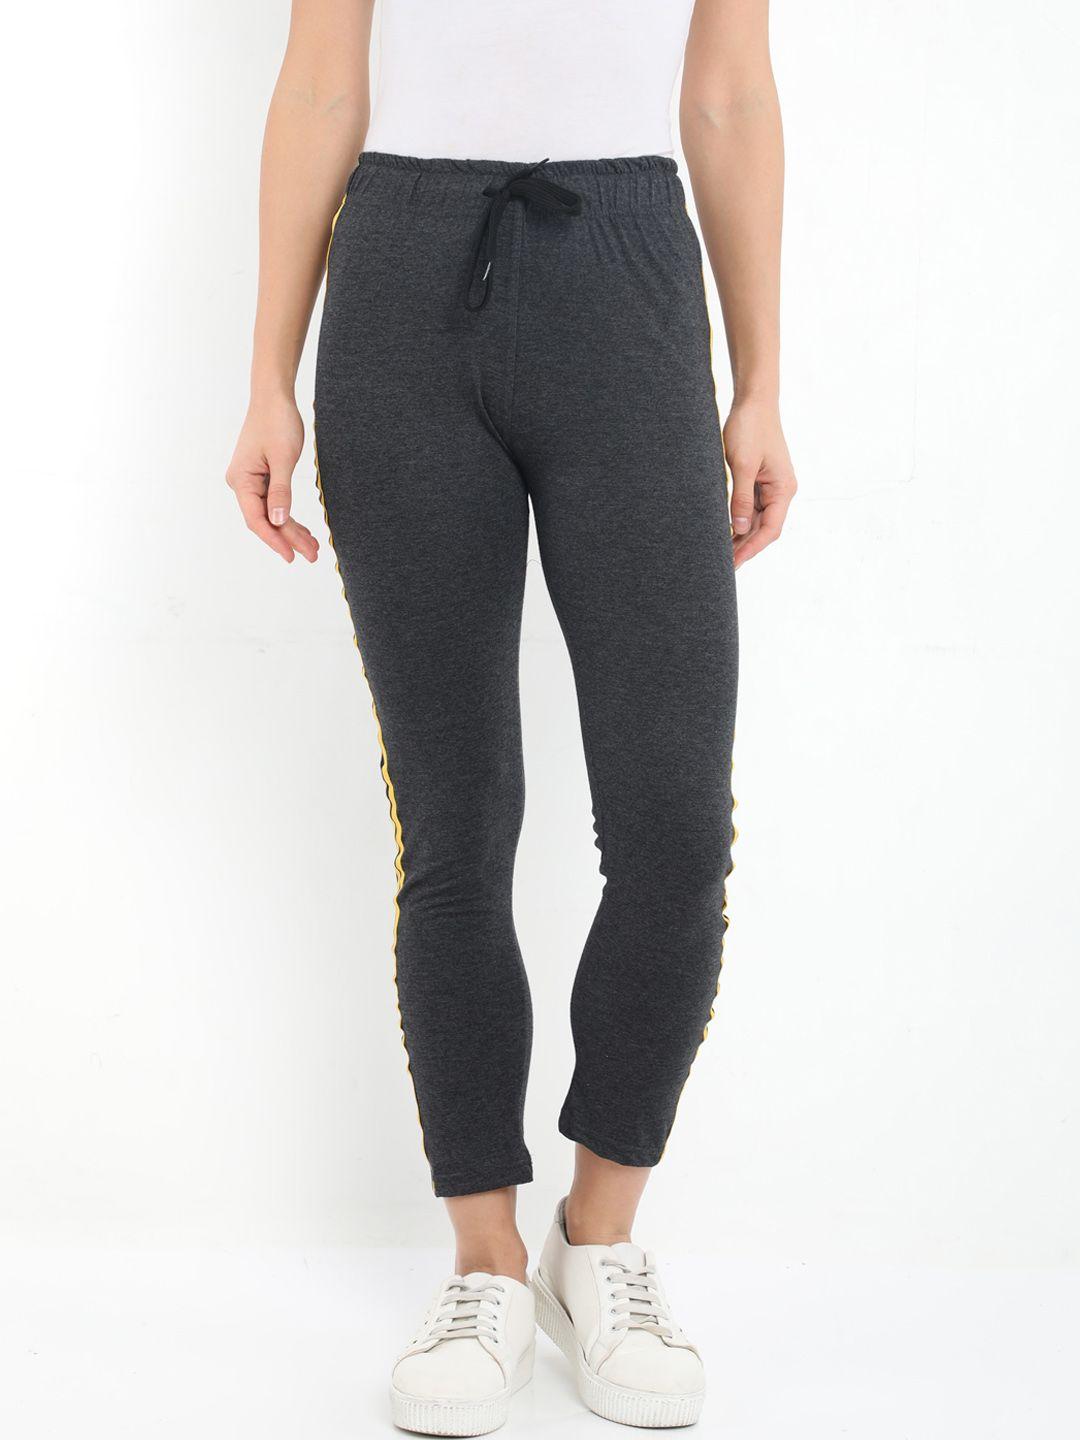 fleximaa women charcoal grey solid cotton track pants